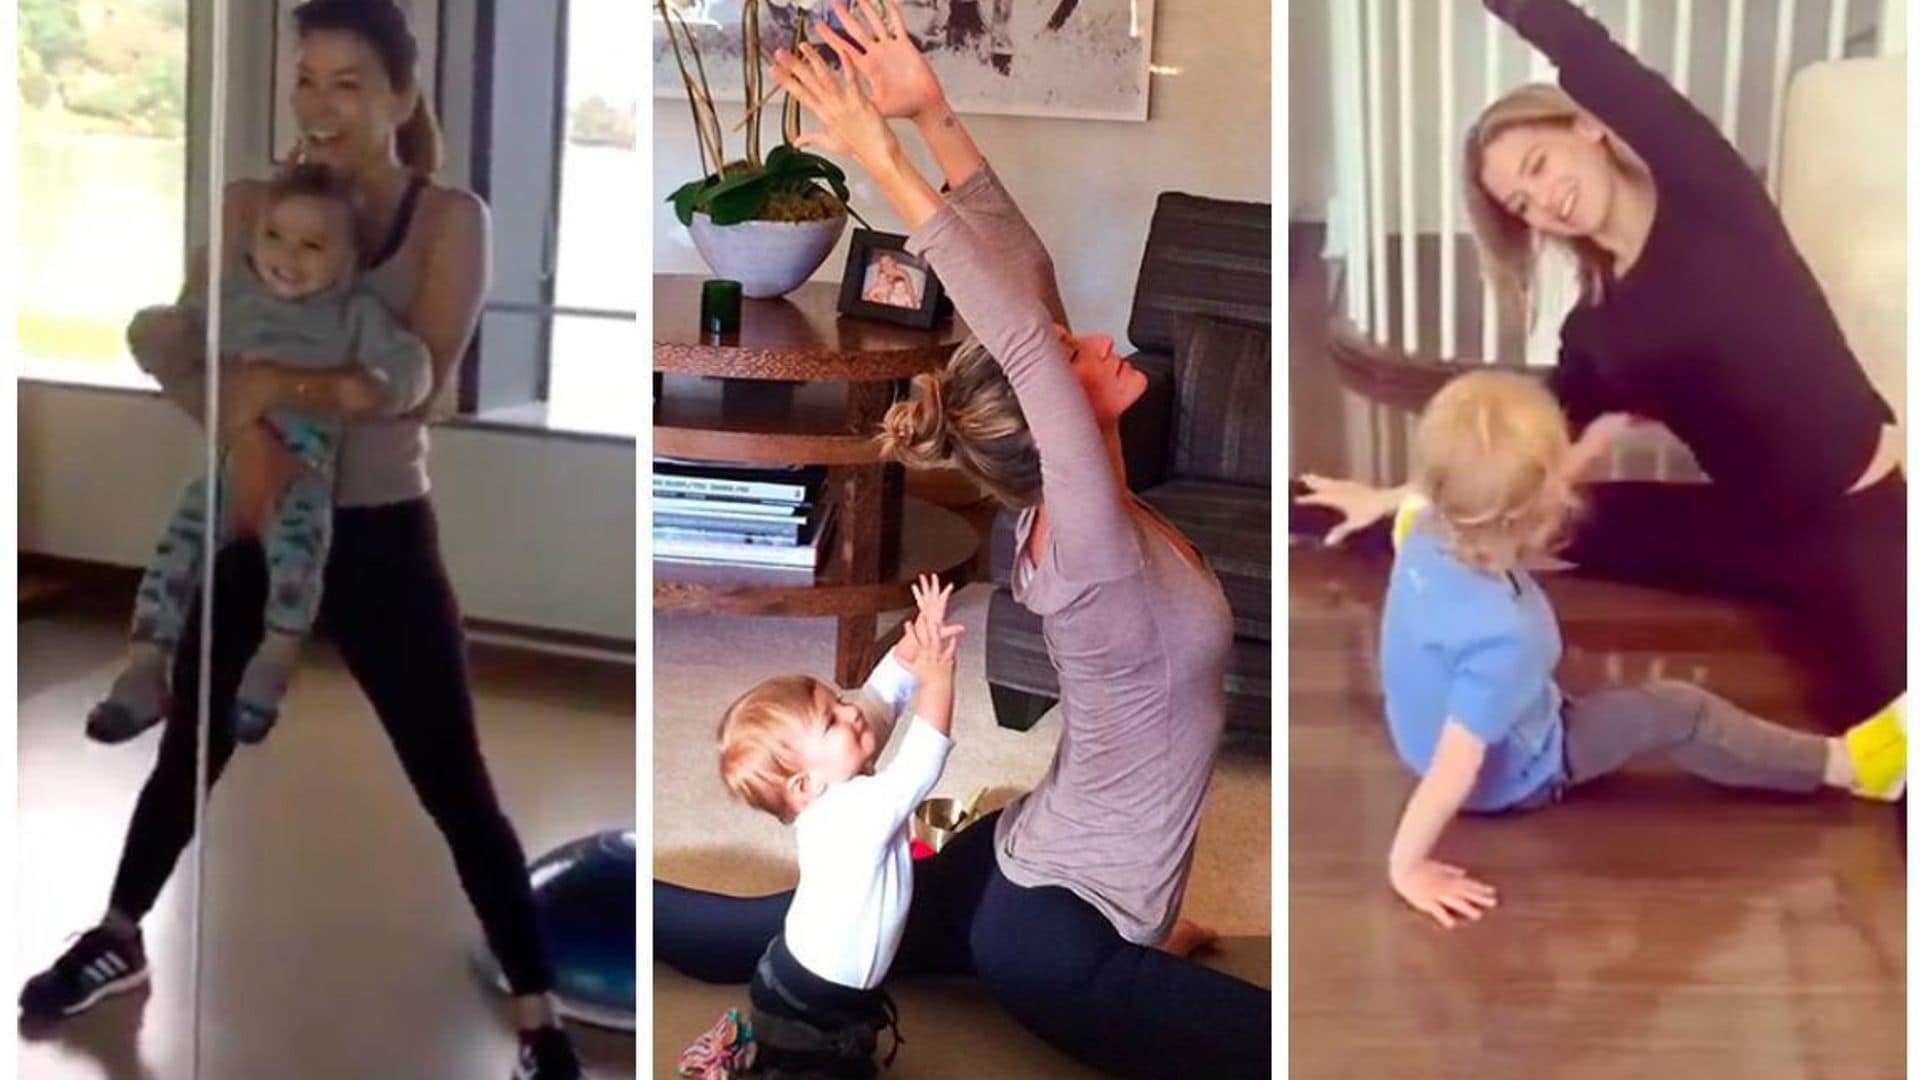 Eva Longoria, Gisele Bundchen, and Blake Lively are moms who exercise with their kids